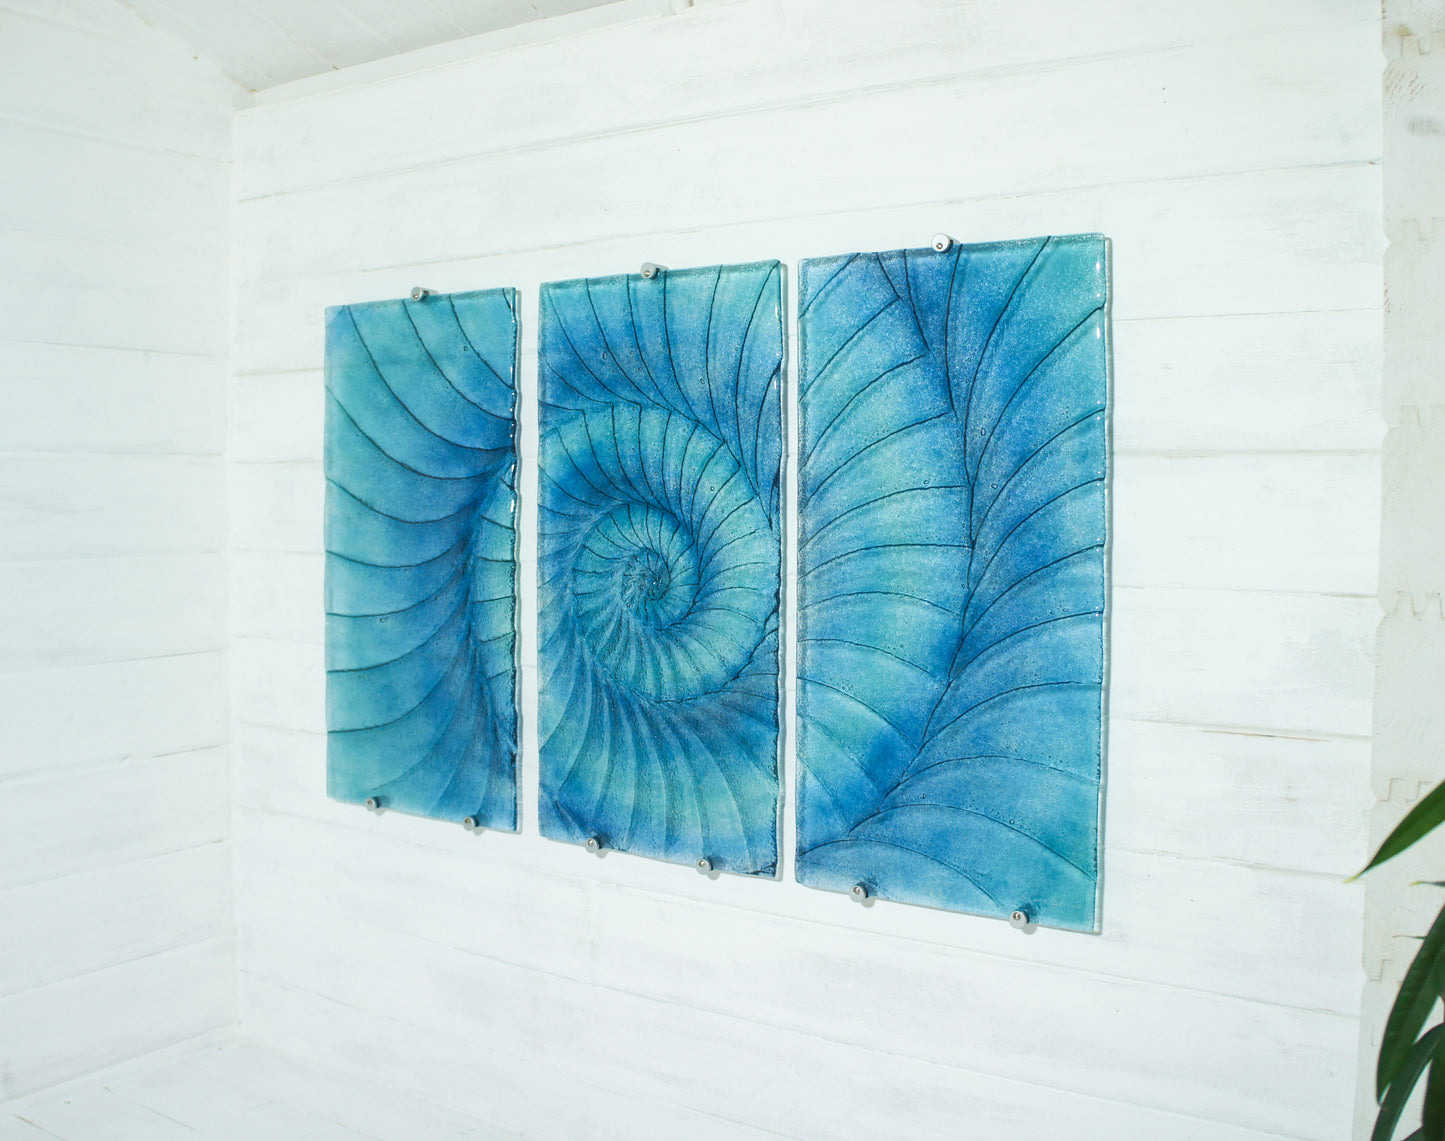 Triptych Ammonite Wall Art OVERALL 100x60cm (40x23") incl. gaps and 9 fixings - Blue/Turquoise/Midnight Blue - Each Panel 30x60cm (12x23") Large Portrait Fossil Fused Glass Wall Art